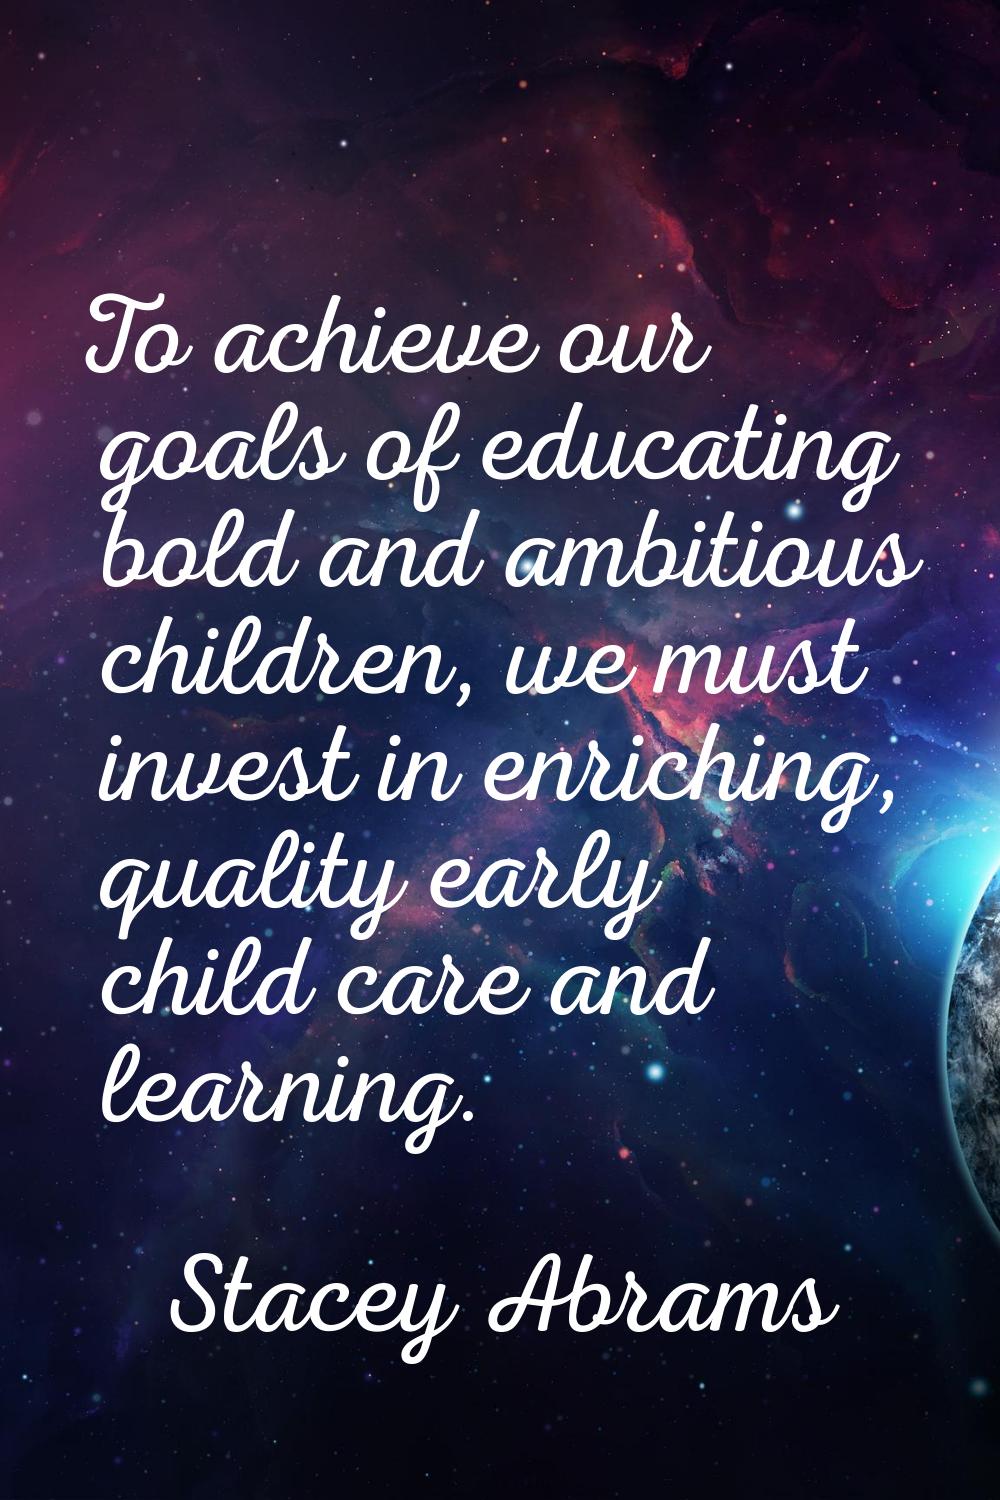 To achieve our goals of educating bold and ambitious children, we must invest in enriching, quality